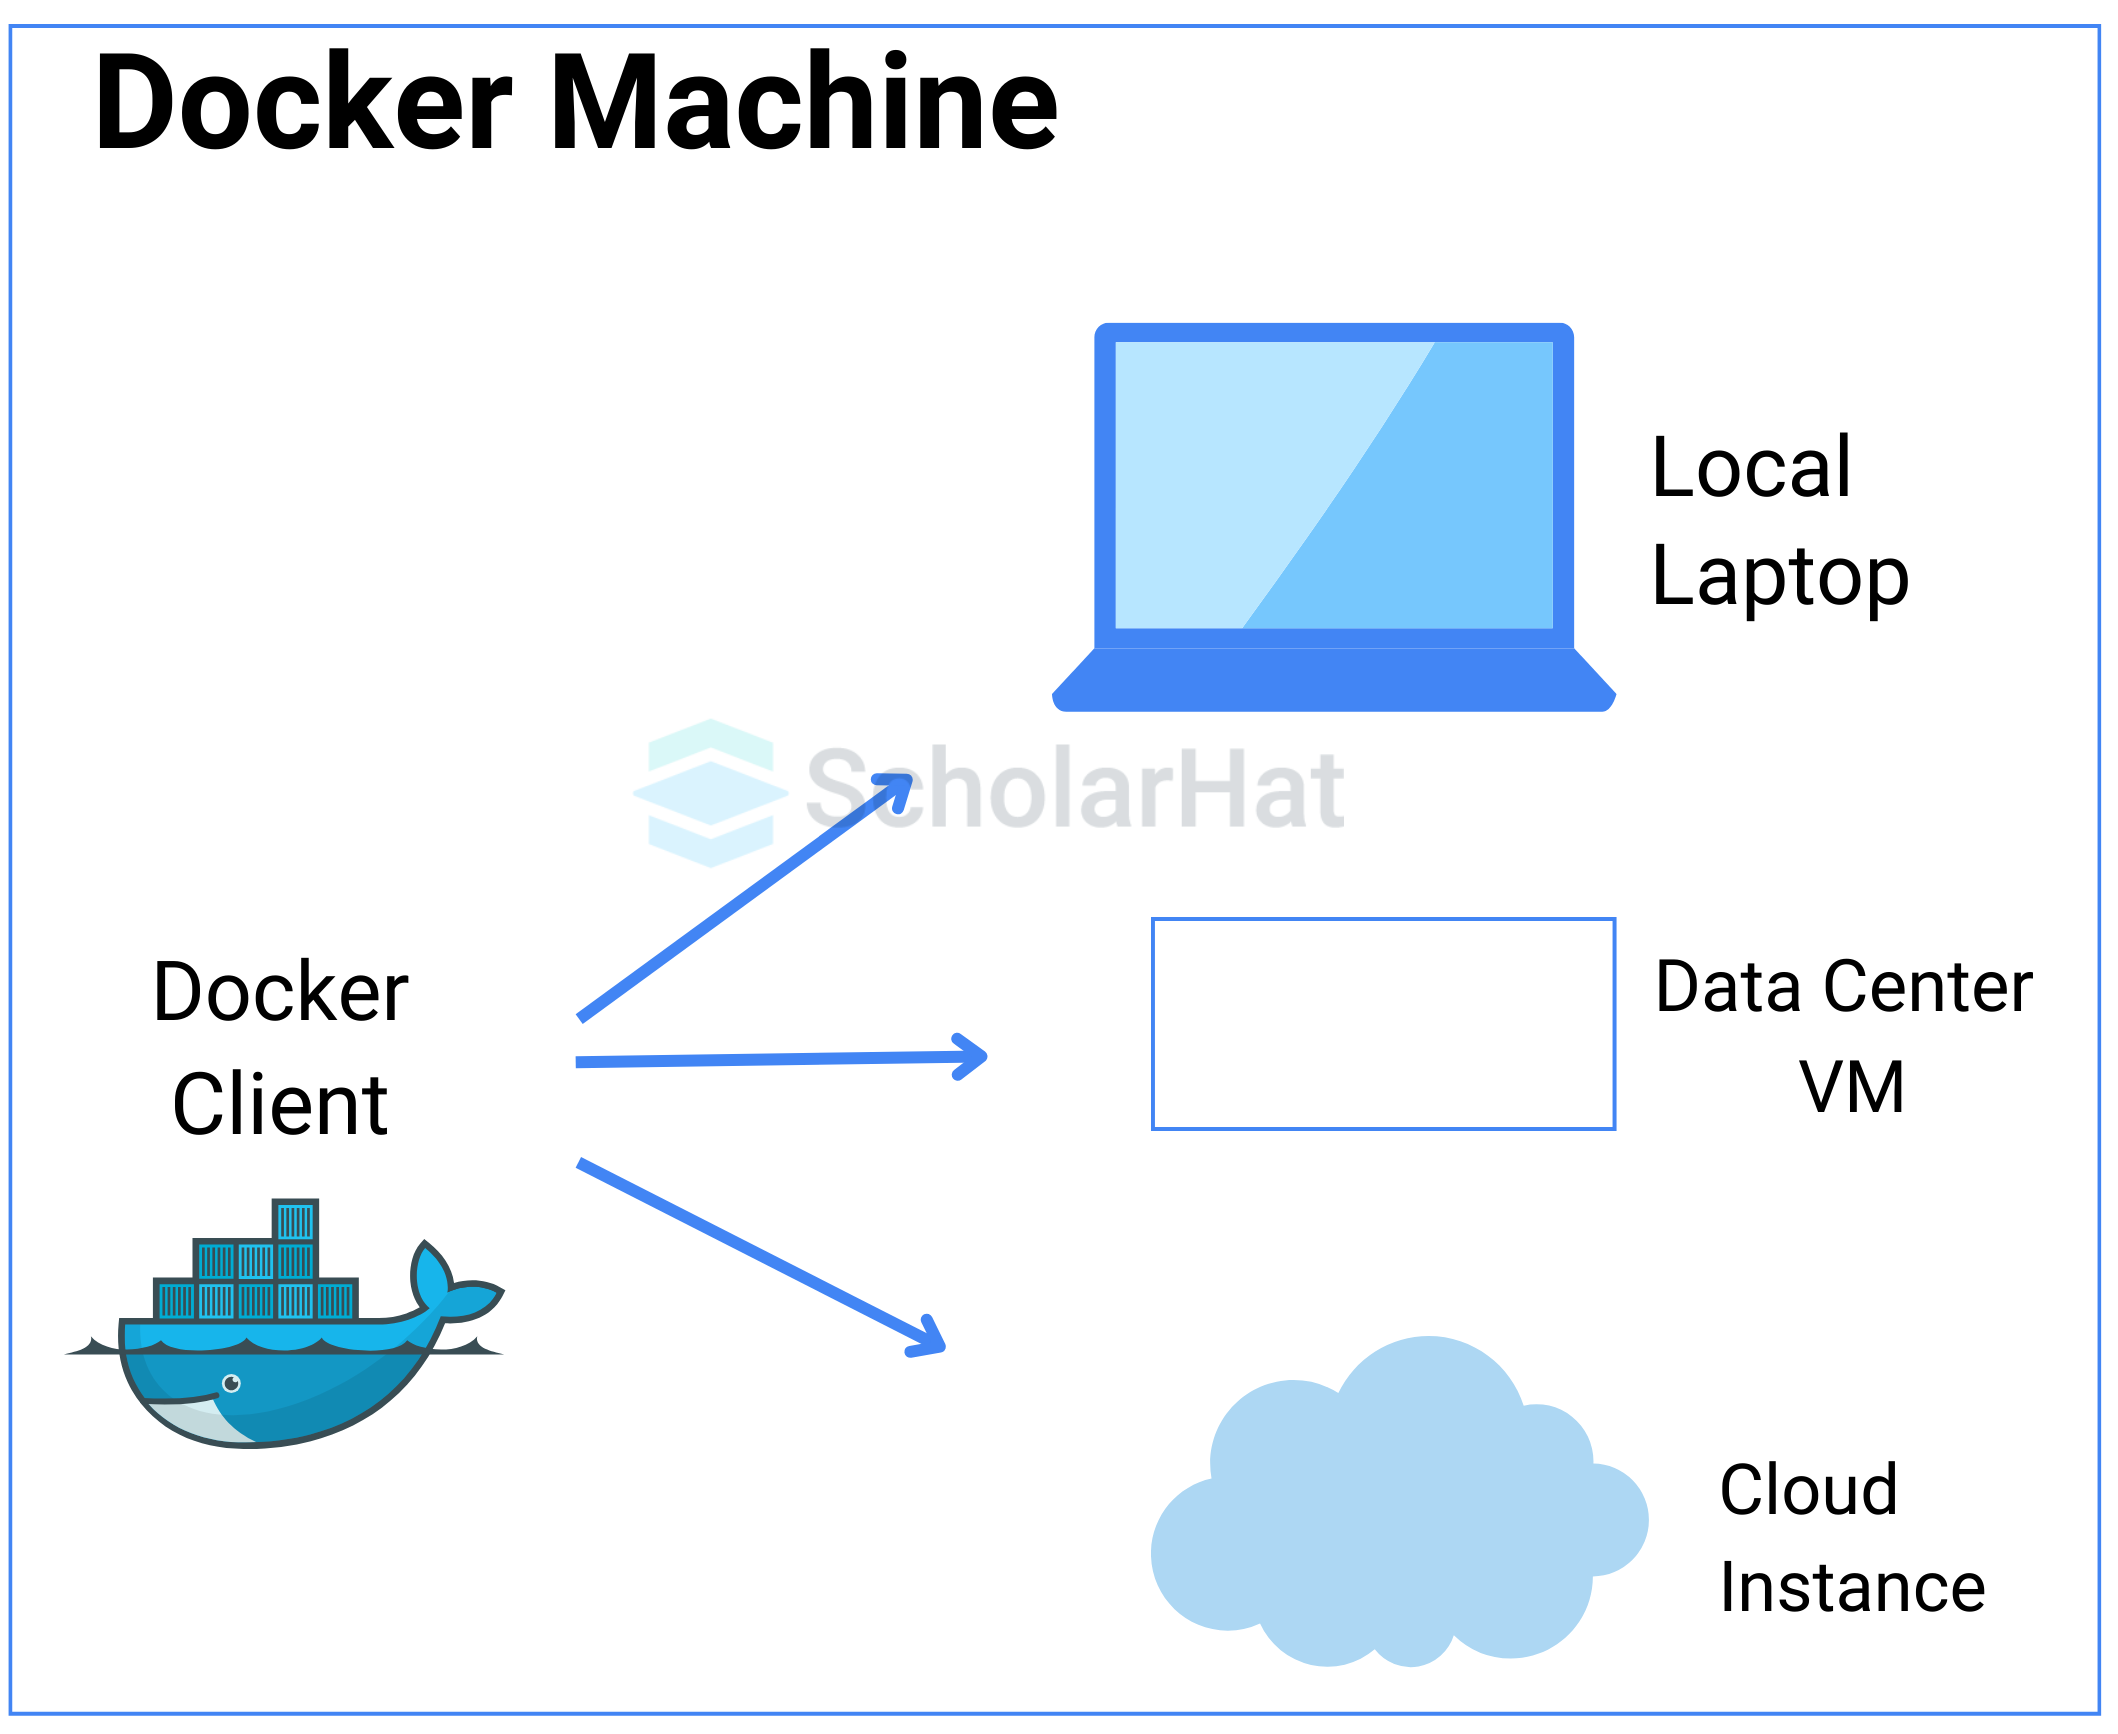 What is Docker Machine and how is it used?